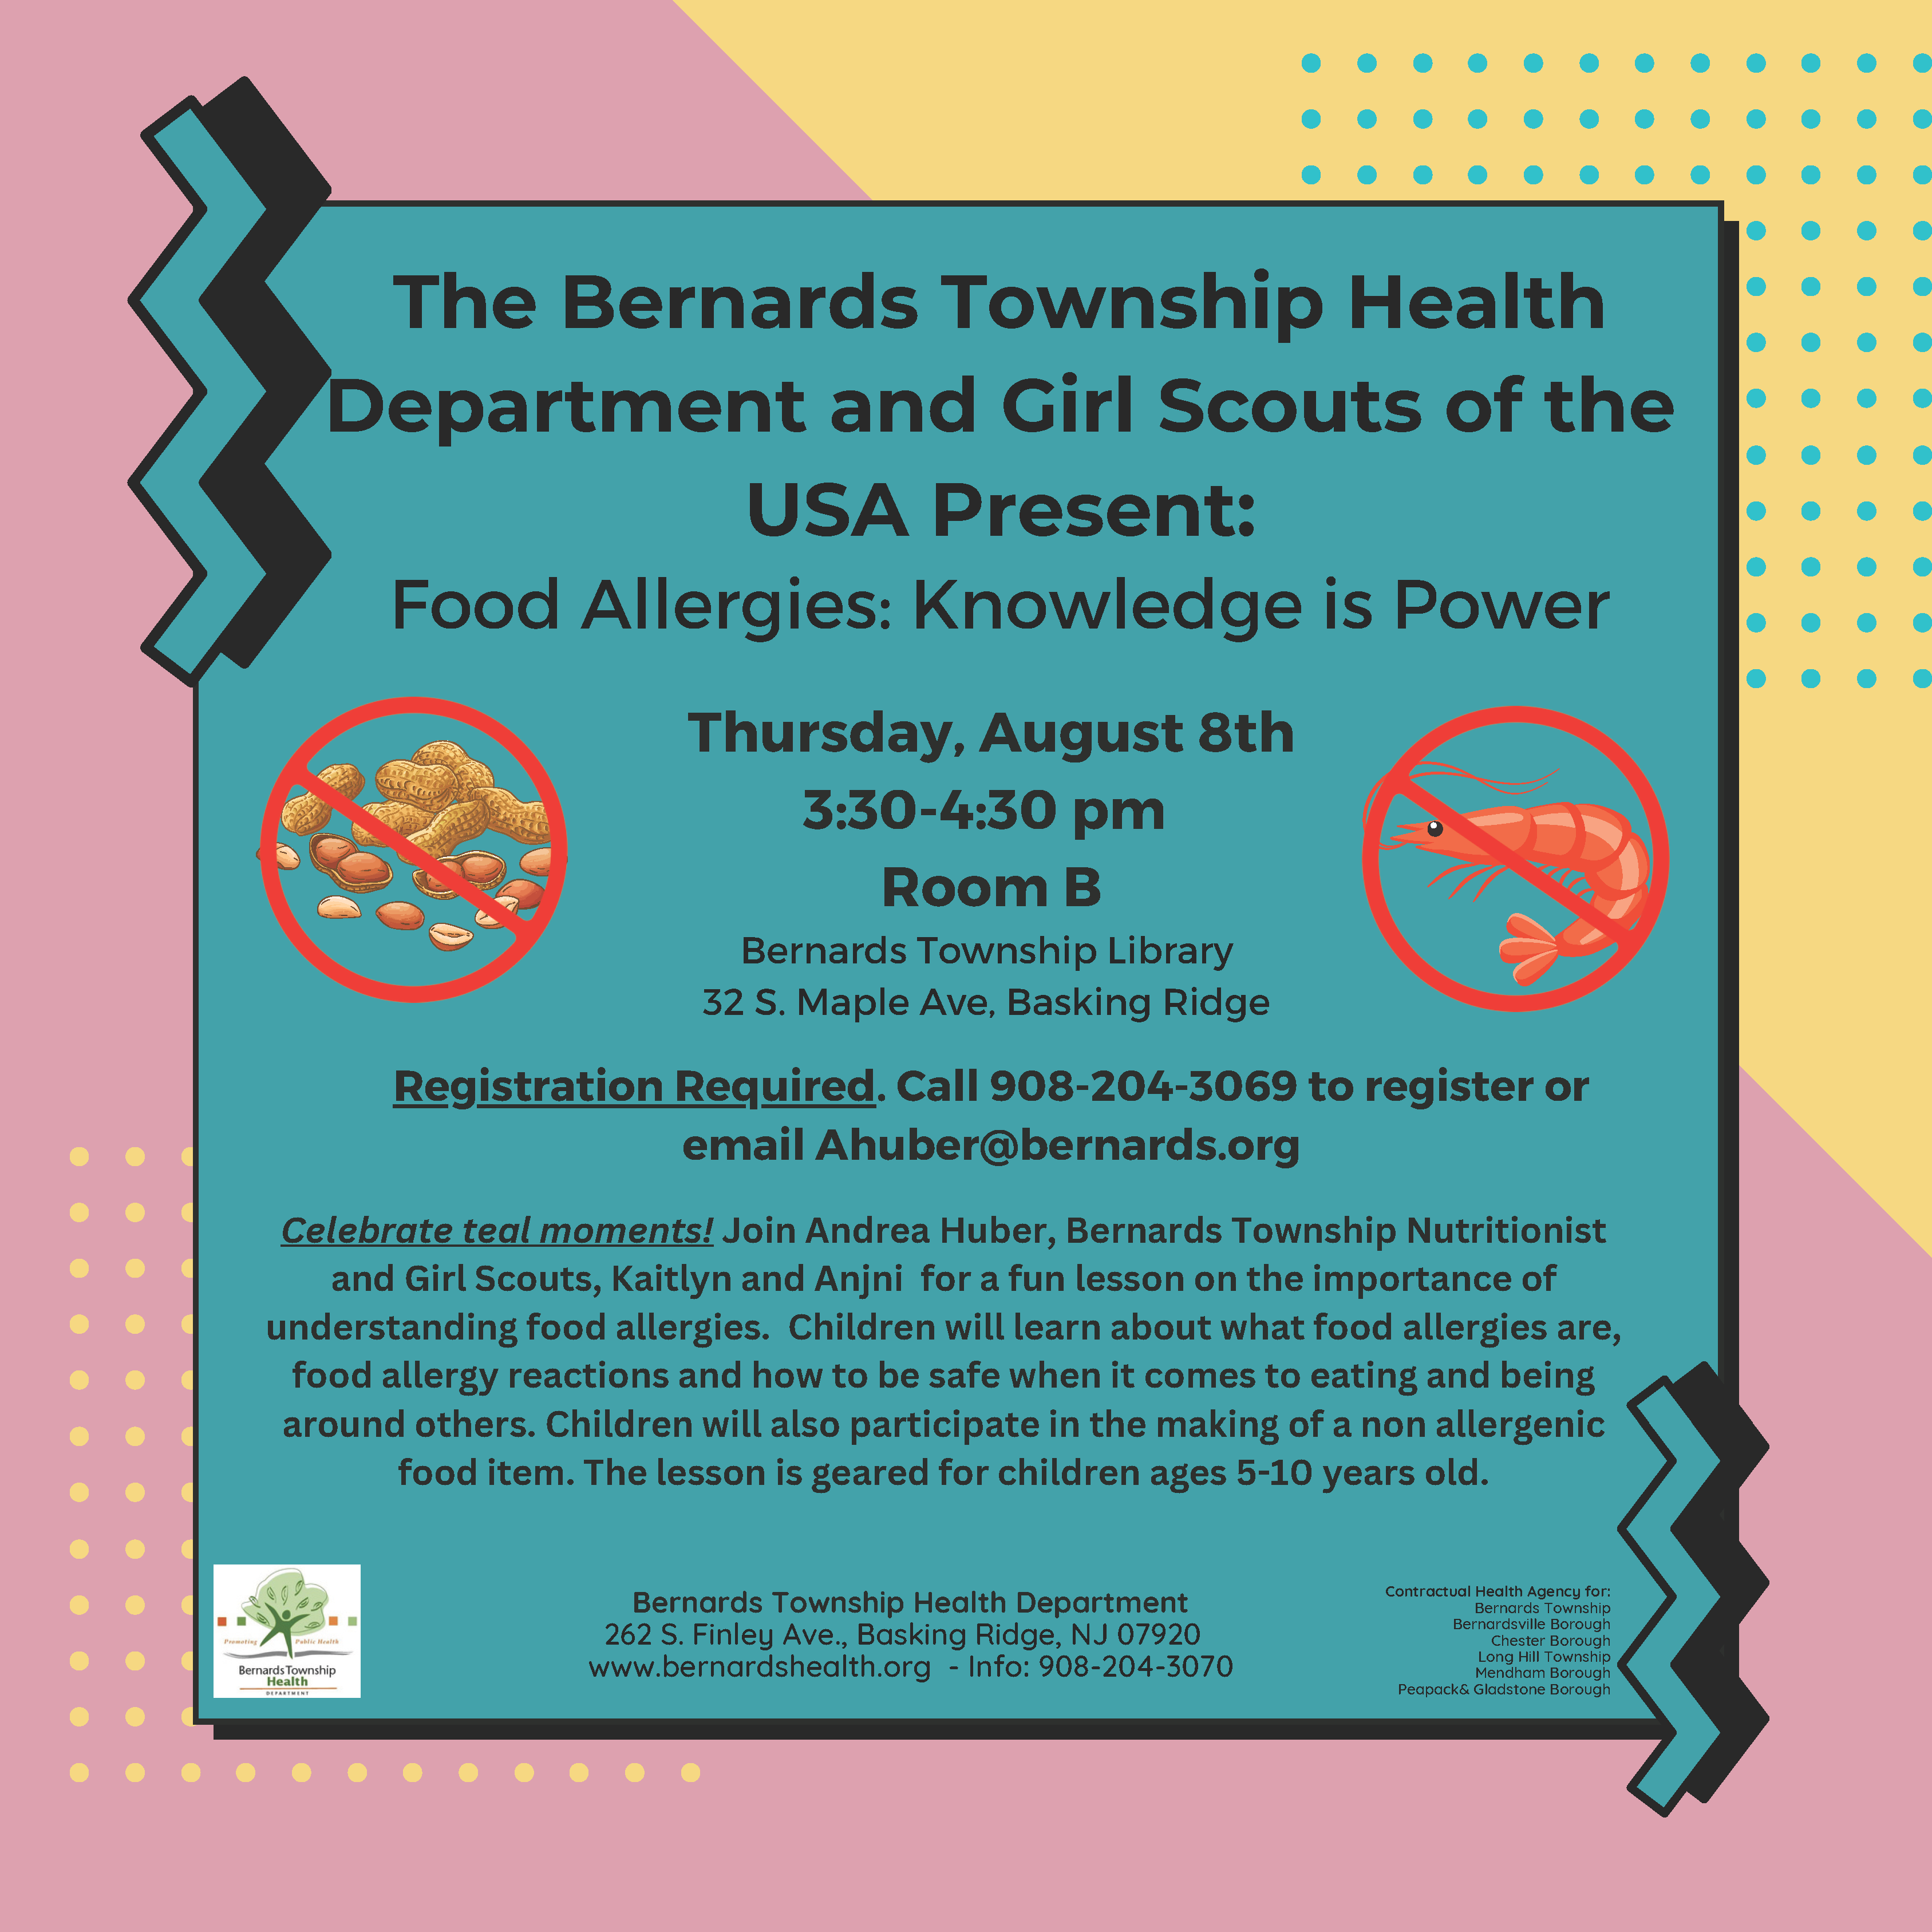 Food Allergy Program Flyer. Click to open an OCR scanned PDF version of it.